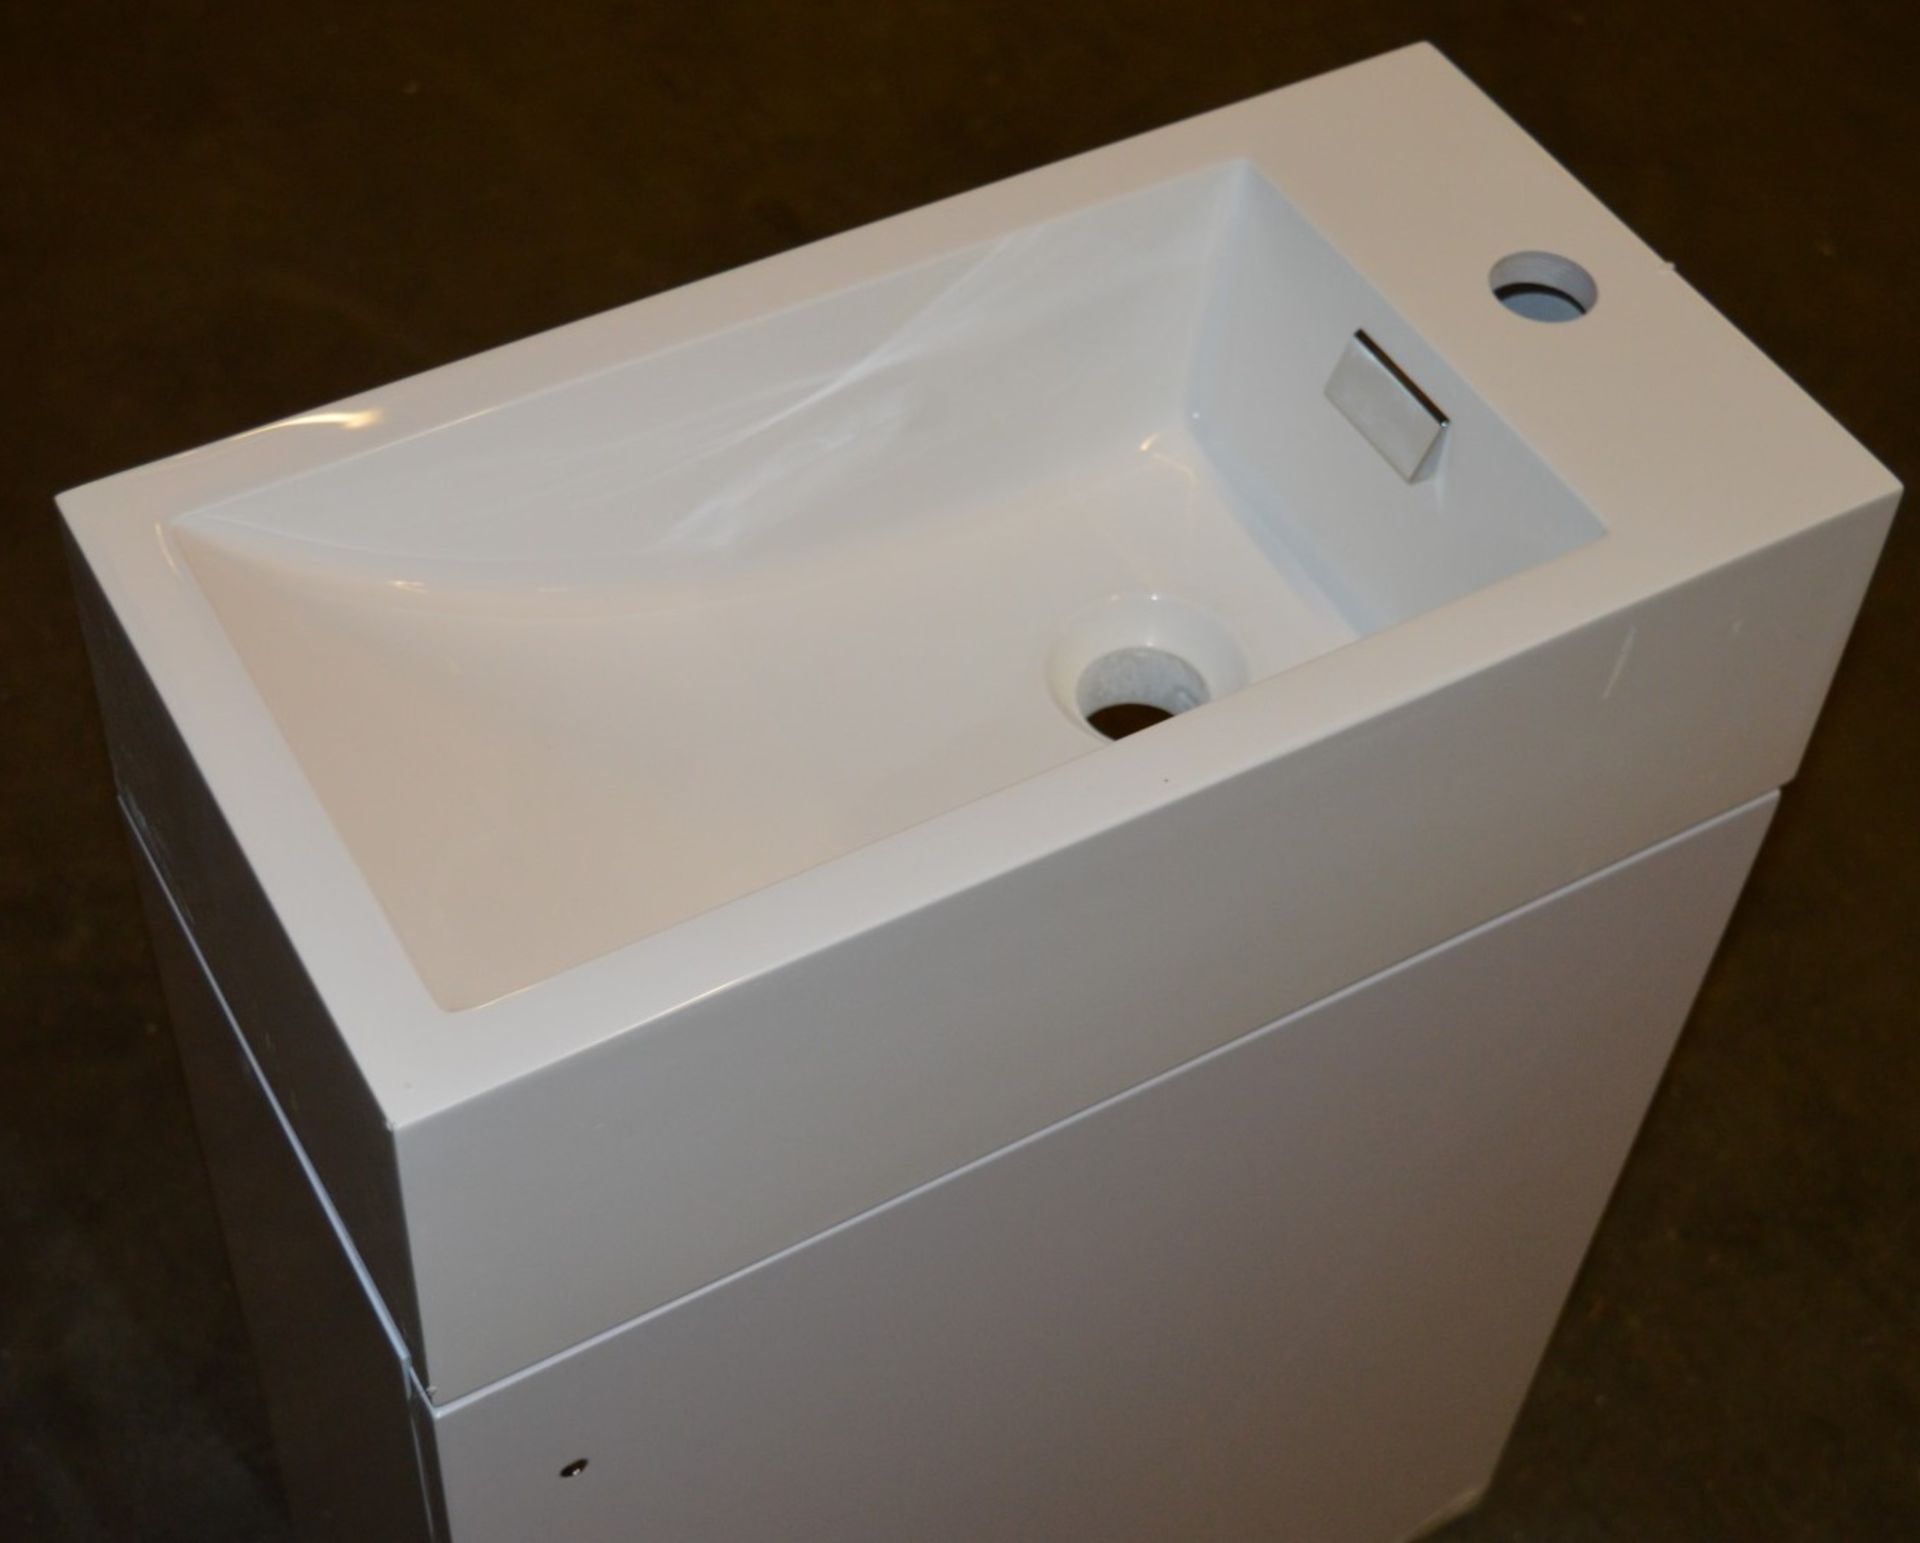 1 x Vogue Bathrooms JUNO 500mm Wall Hung Bathroom Vanity Unit With Heavy Resin Composite Sink - Image 3 of 7